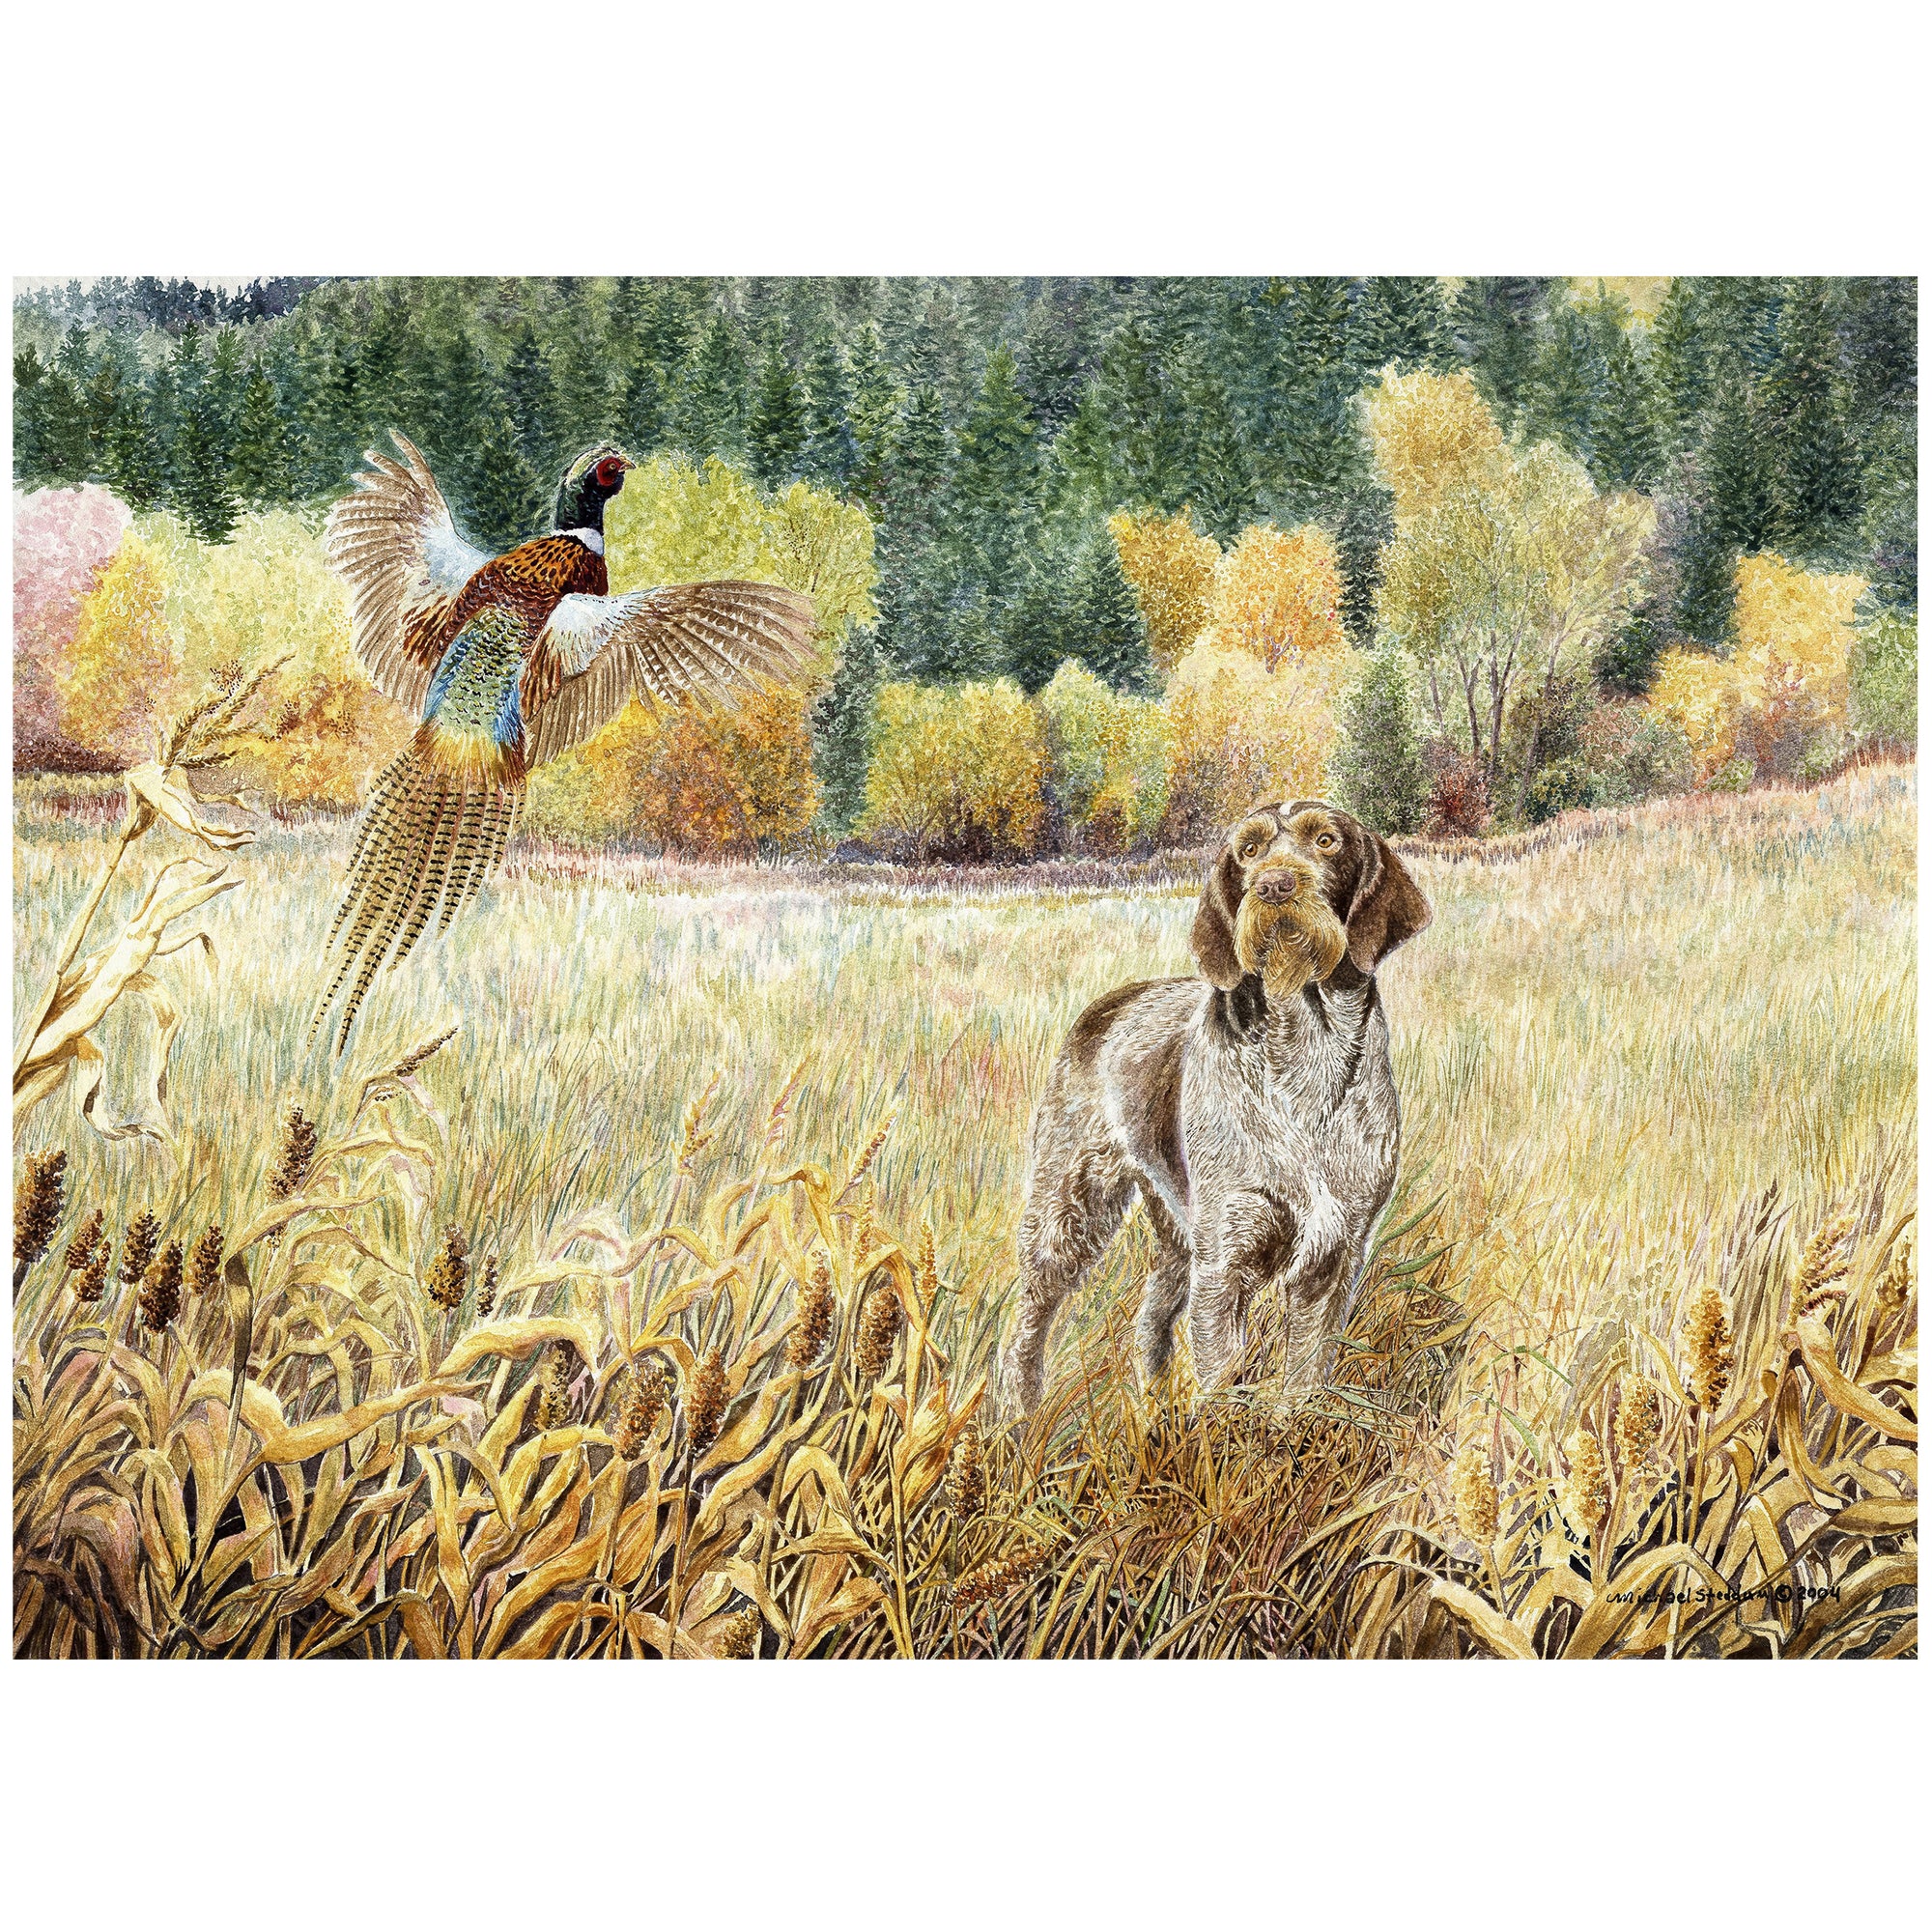 German Wirehaired Pointer Art Reproduction Print – “GWP in the Field” by Michael Steddum - Limited Edition Signed and Numbered German Wirehaired Pointer Dog Art Print - Ideal for a GWP Gift